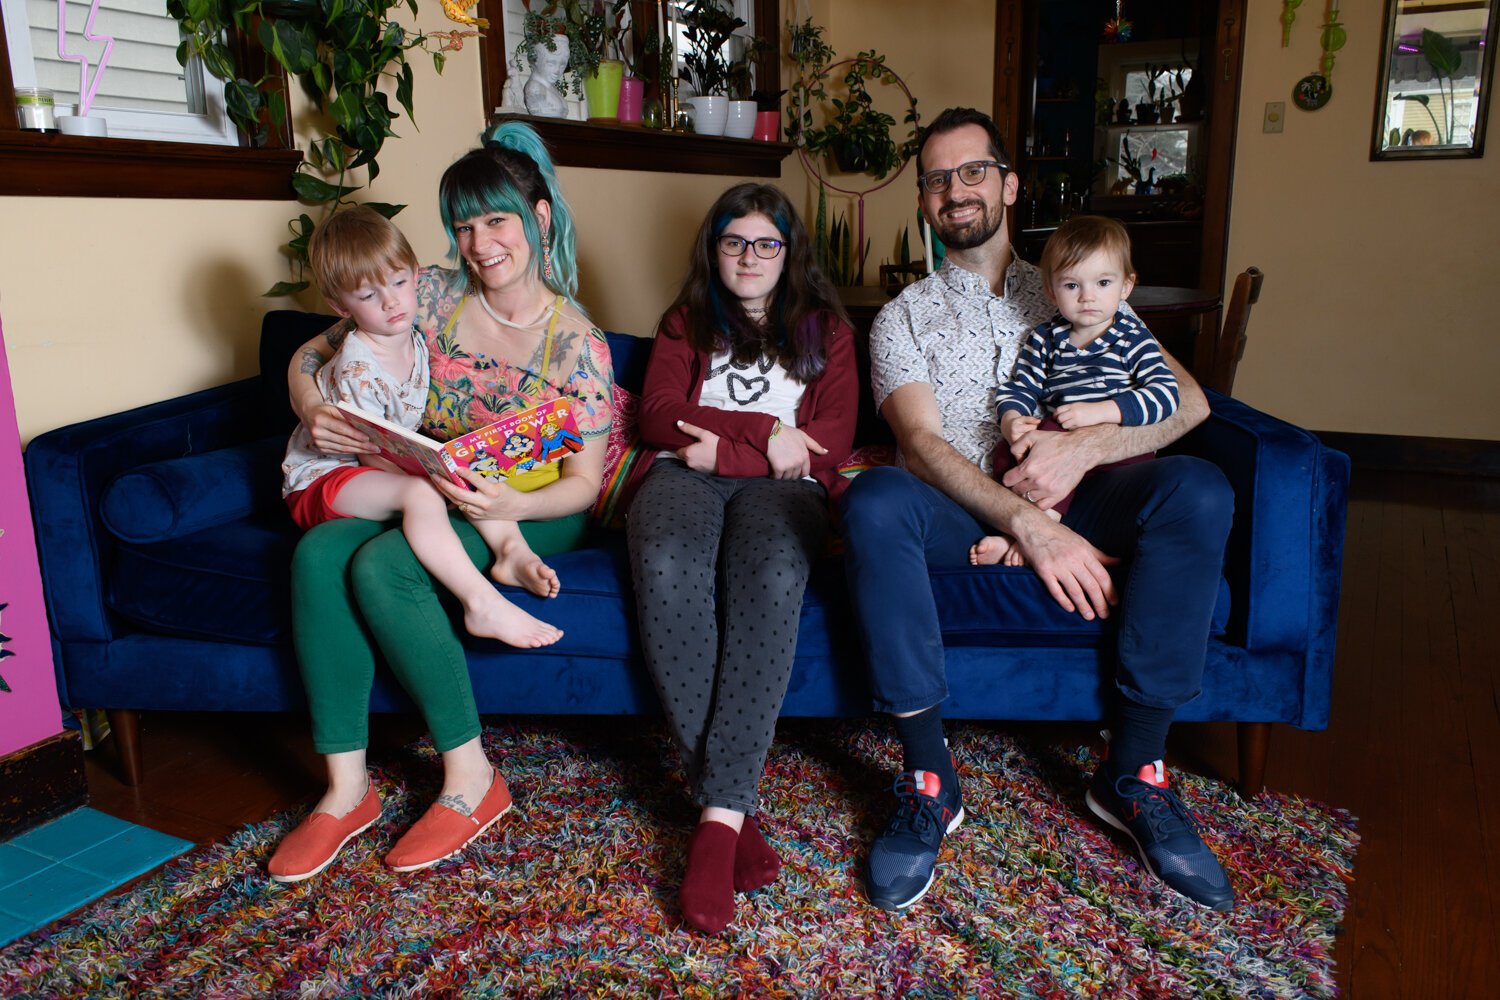 The Porter Family, from left, includes Oliver, 4, Lyndsy Rae, Giana, 12, Ben, and Rew Jupiter, 1, in their living room of their home.